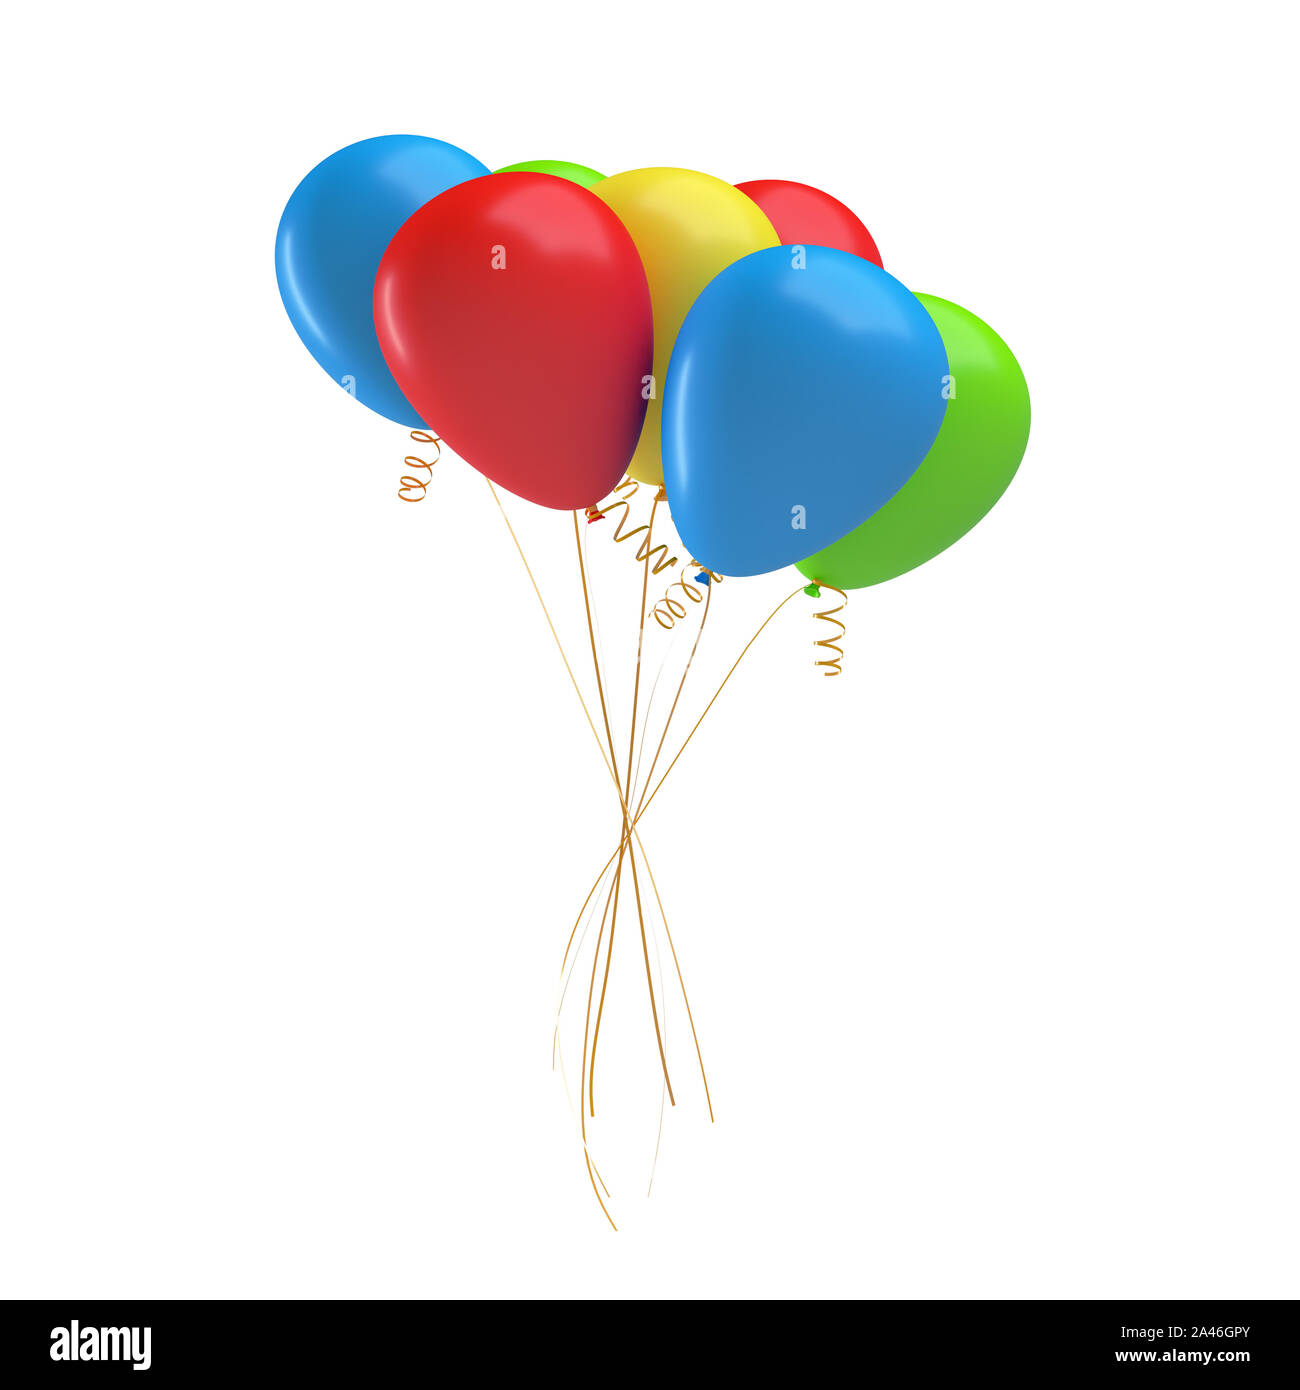 3d rendering of many colorful balloons tied together with a string